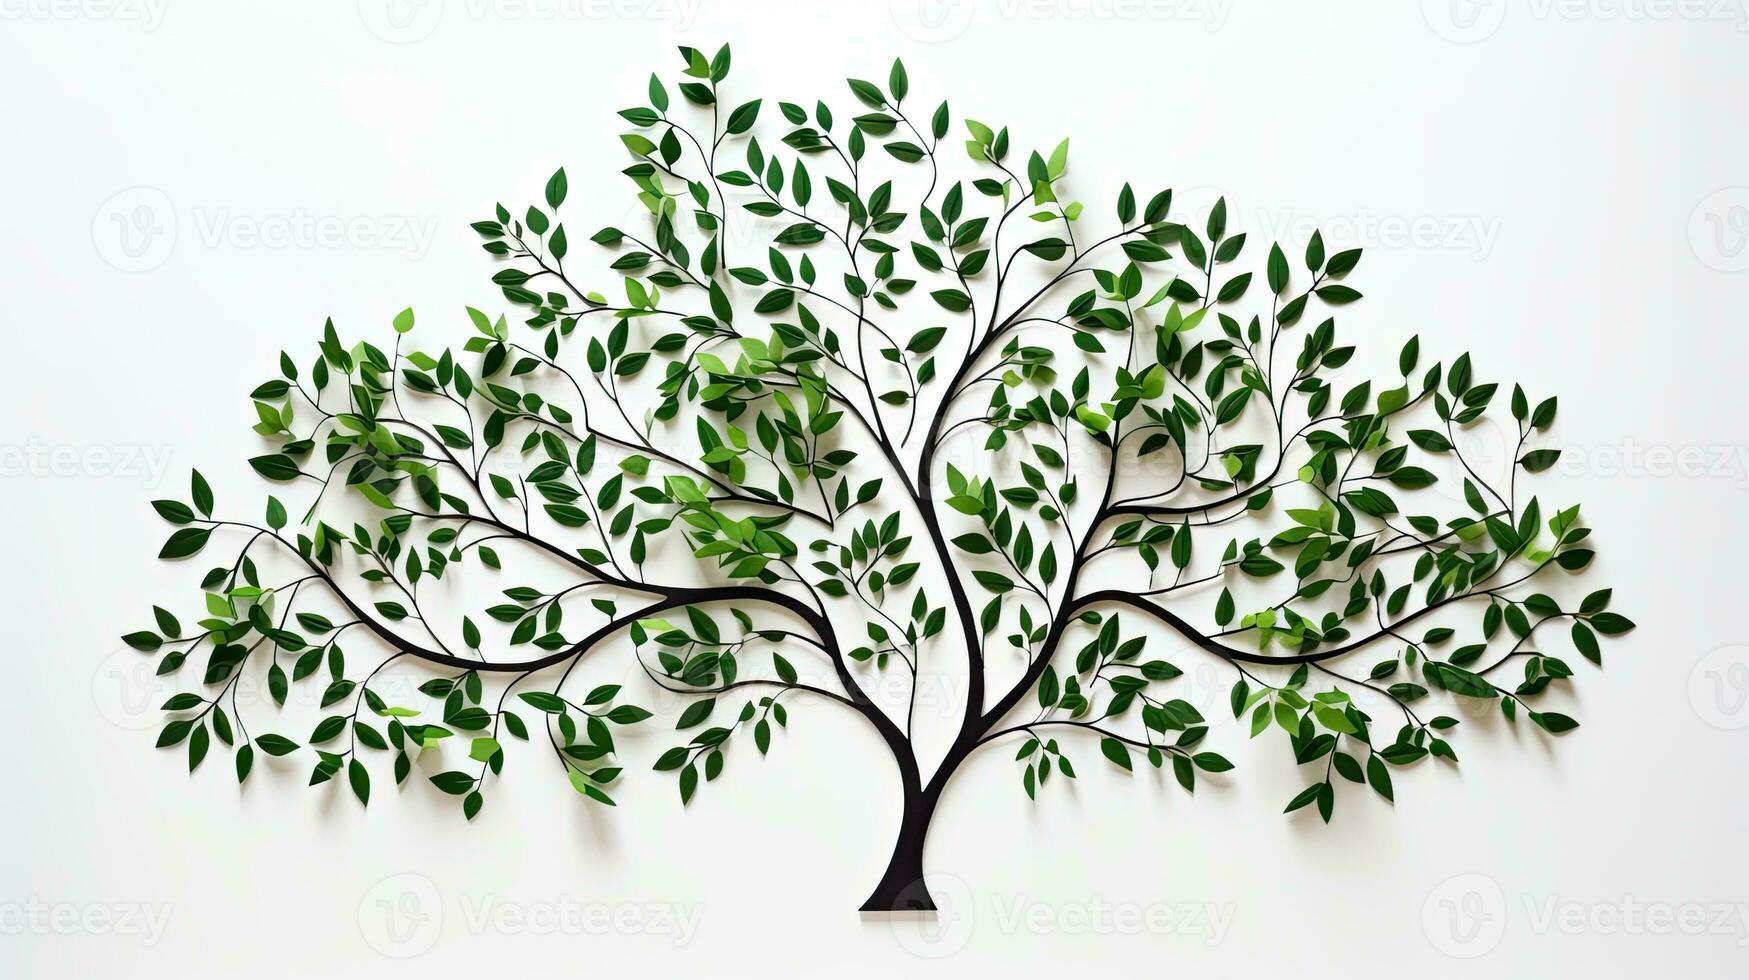 Green leafy tree silhouette on a white background representing nature Flat lay with a creative and aesthetic concept photo